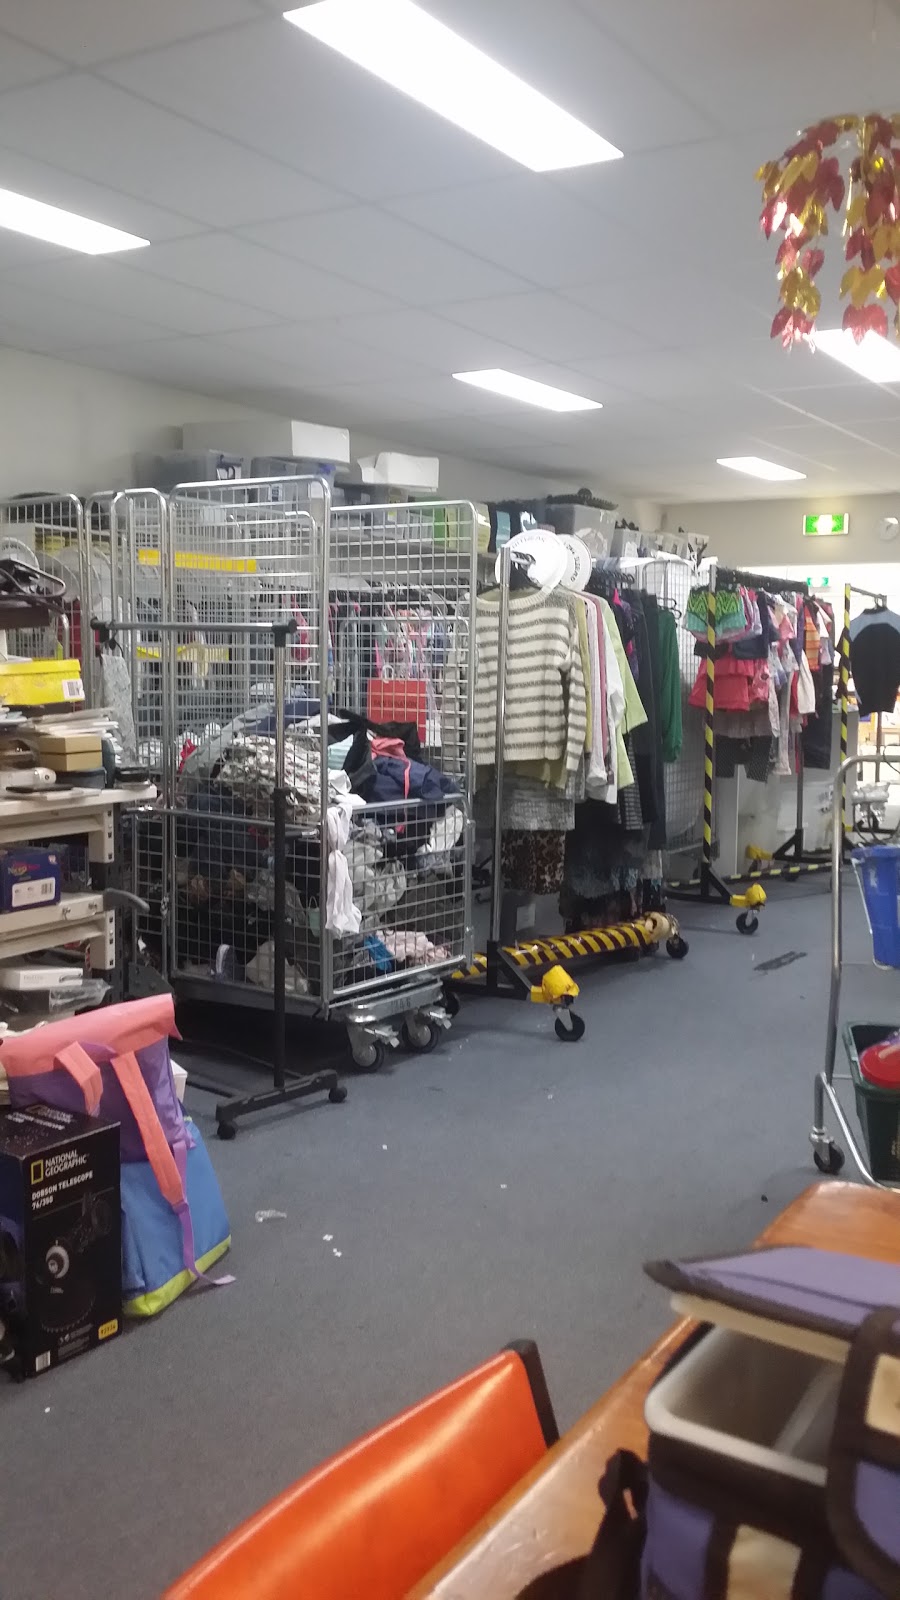 Vinnies Hoppers Crossing | store | 12/10 Costa Drive, Hoppers Crossing VIC 3029, Australia | 0397485010 OR +61 3 9748 5010